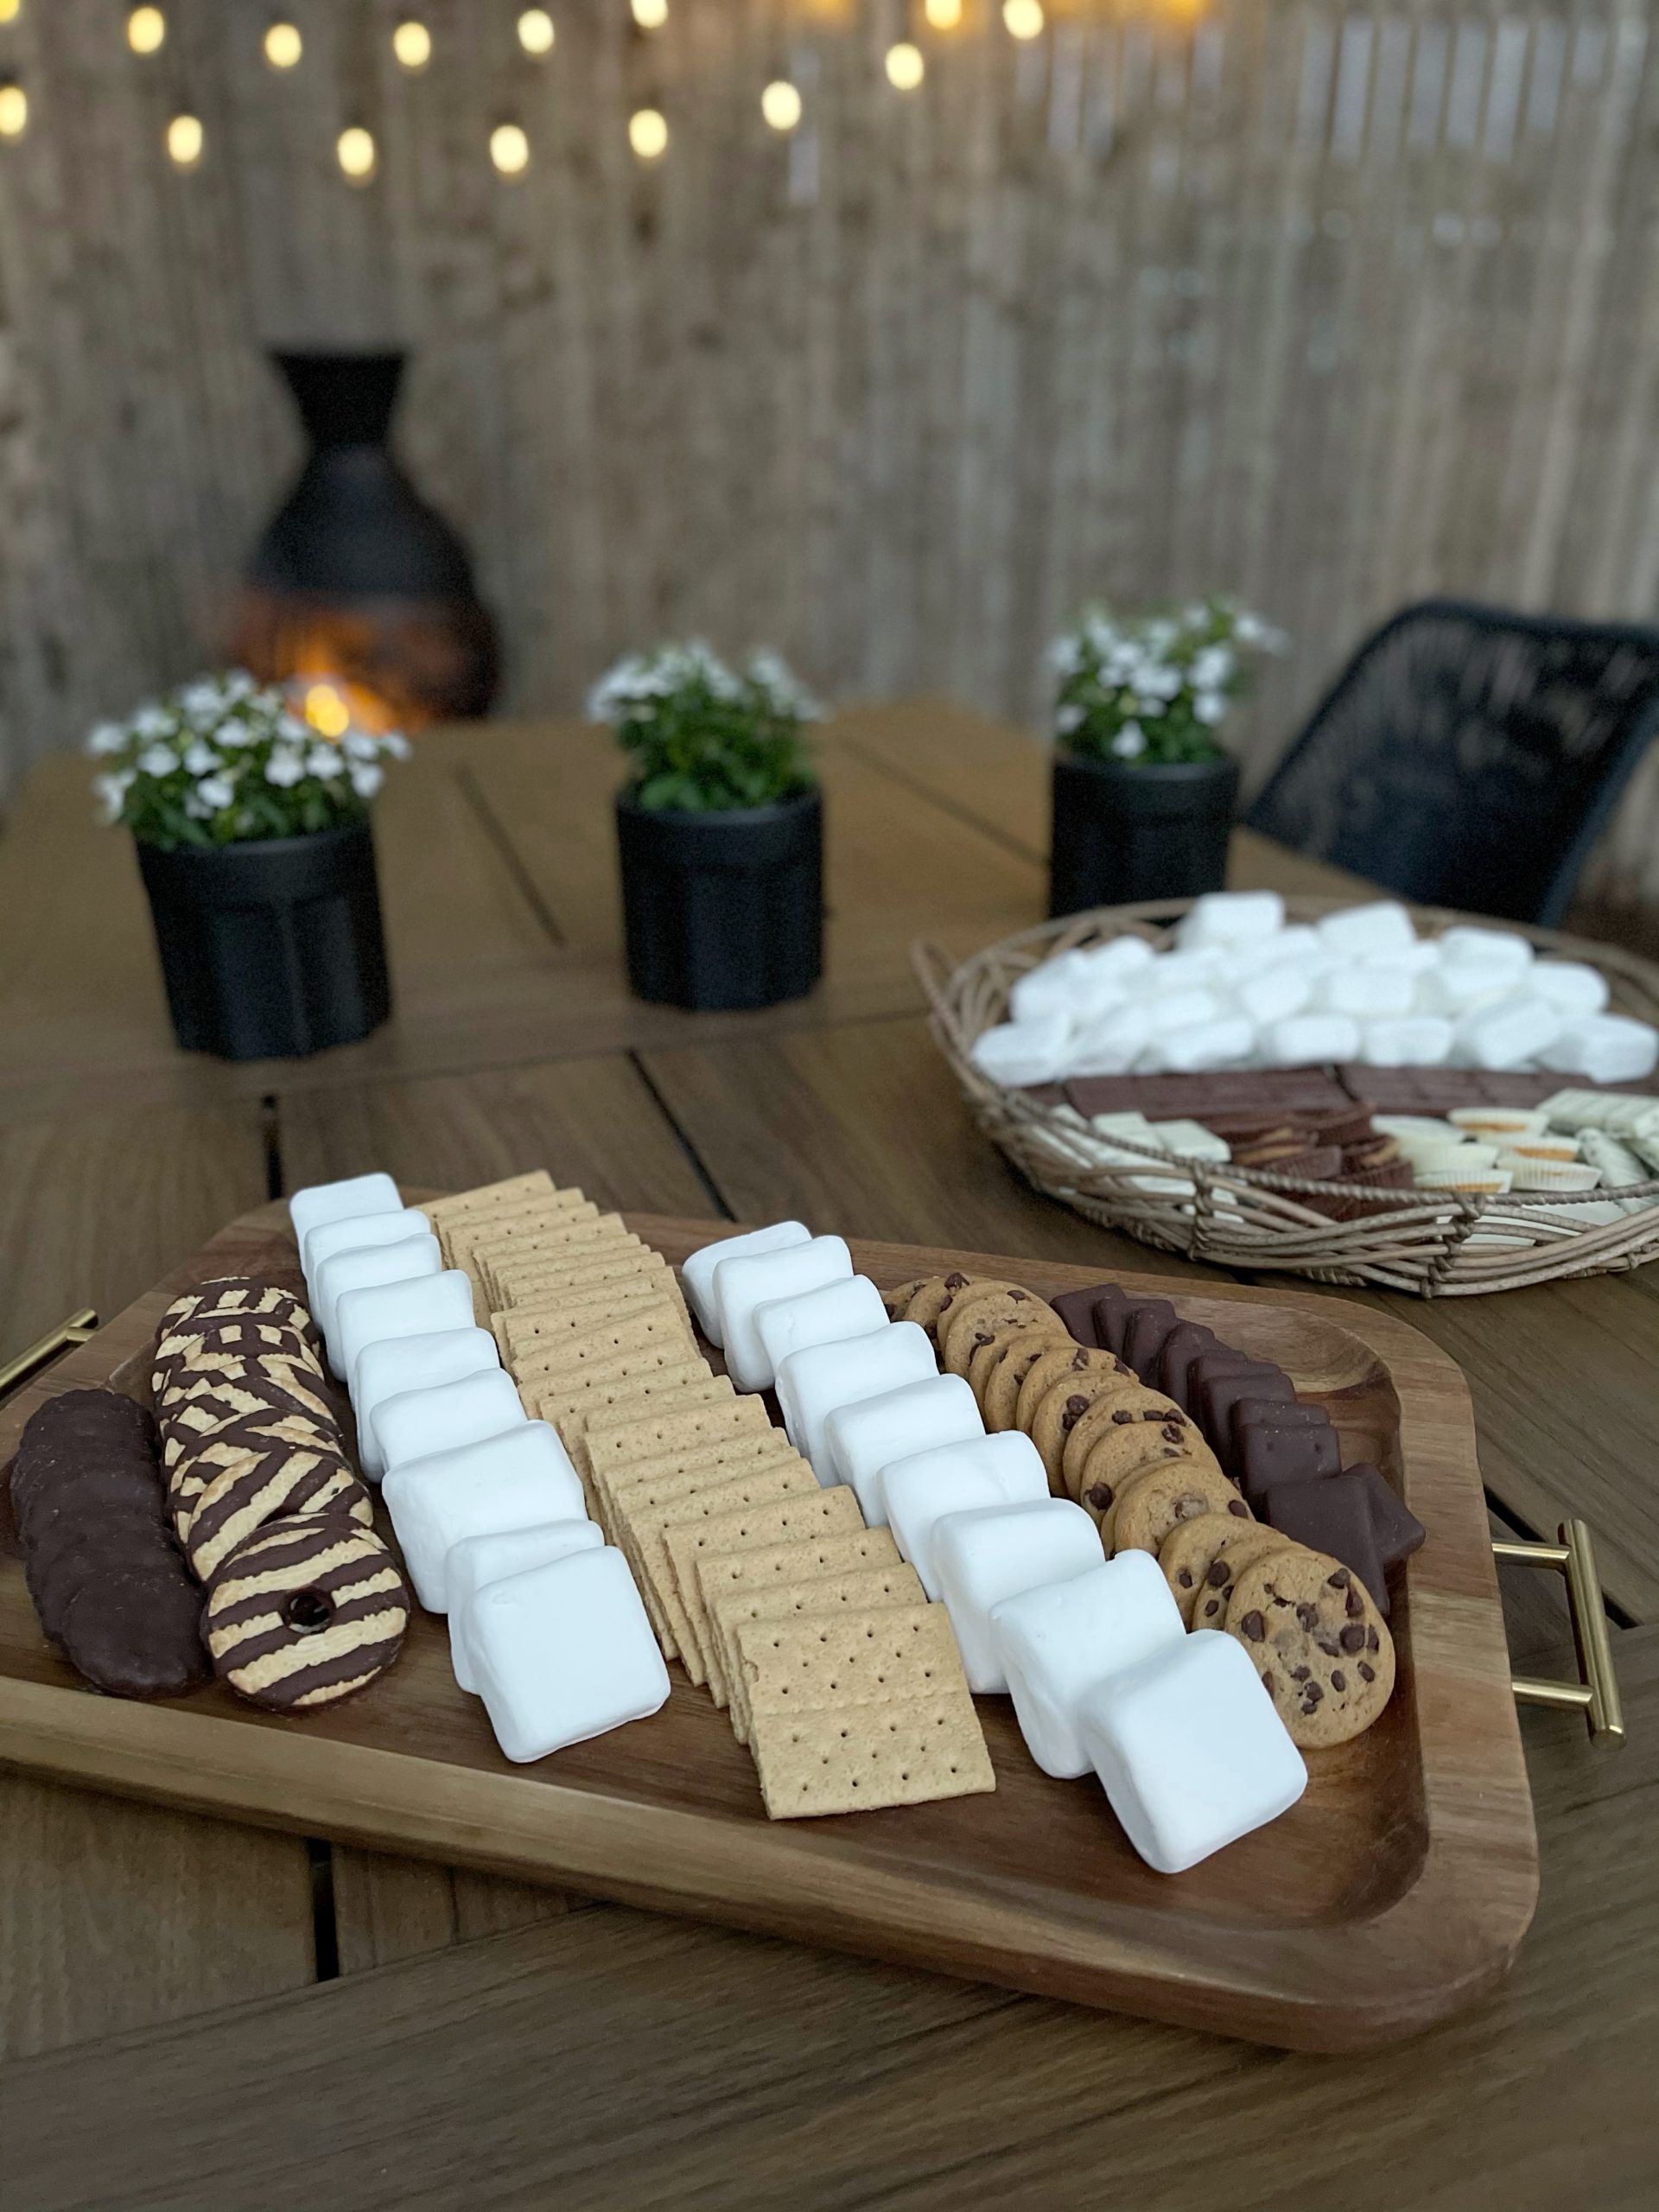 S’mores Night